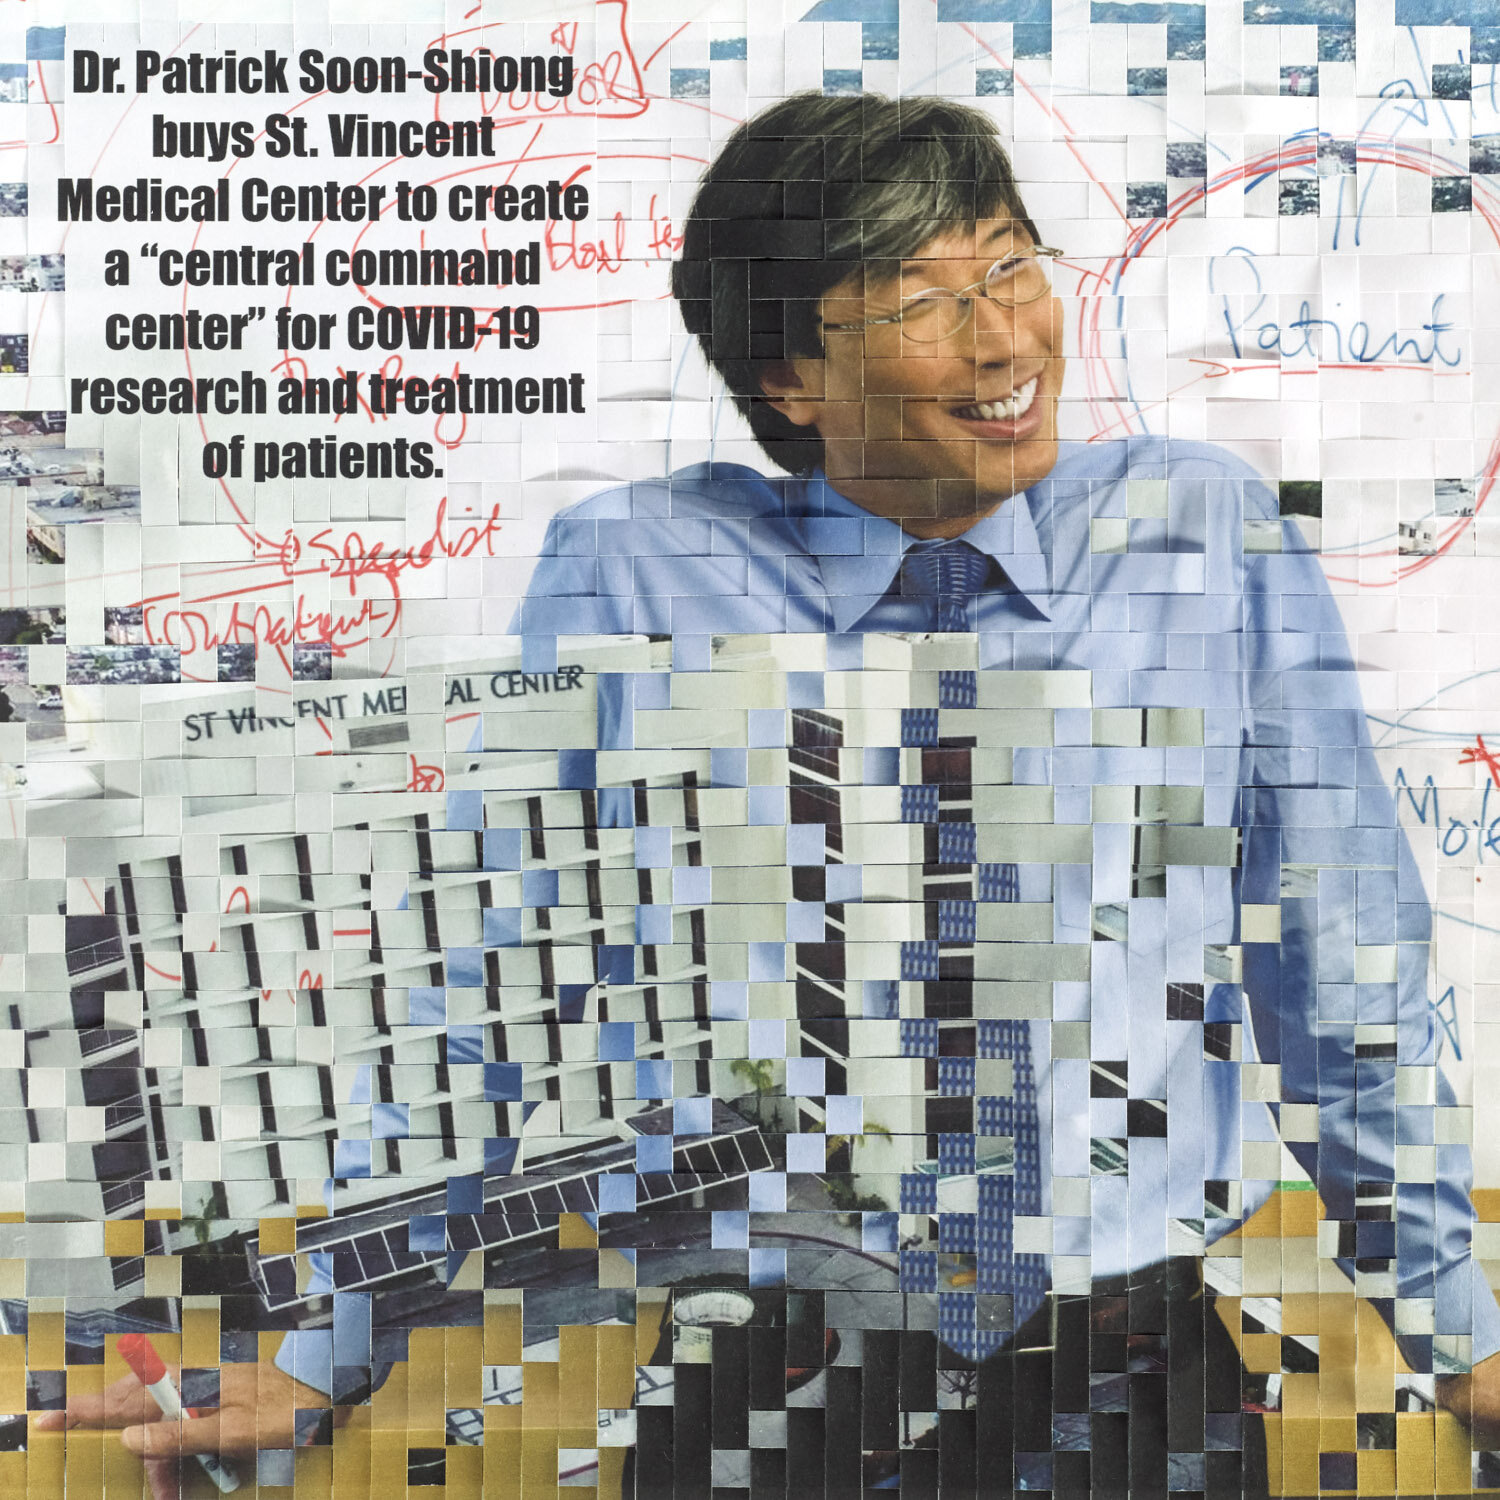 Day 43: Dr. Patrick Soon-Shiong